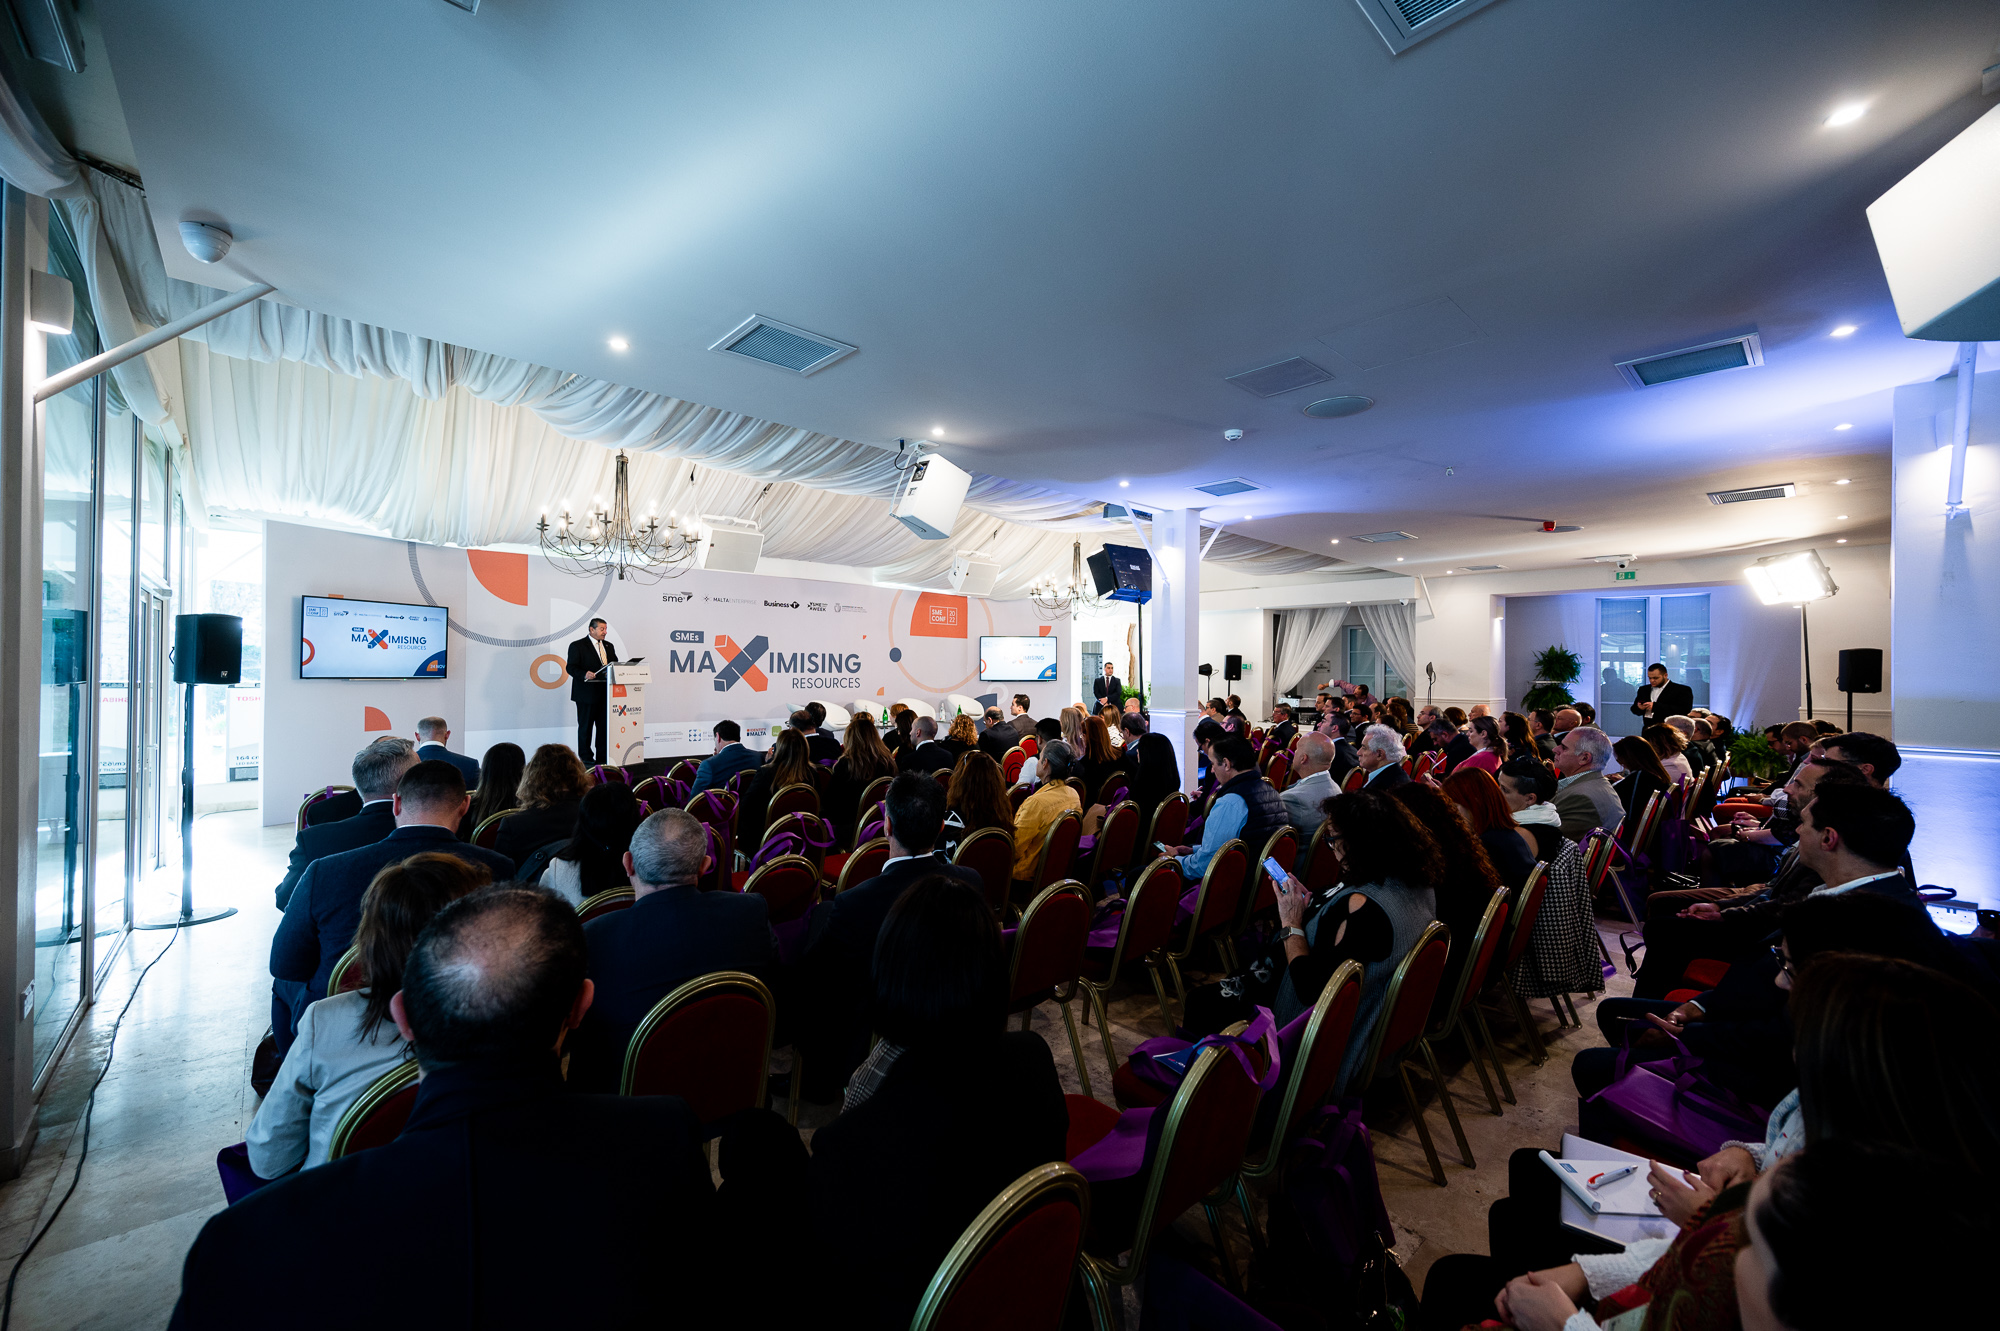 Successful SME 2022 Conference attracts 300 business owners